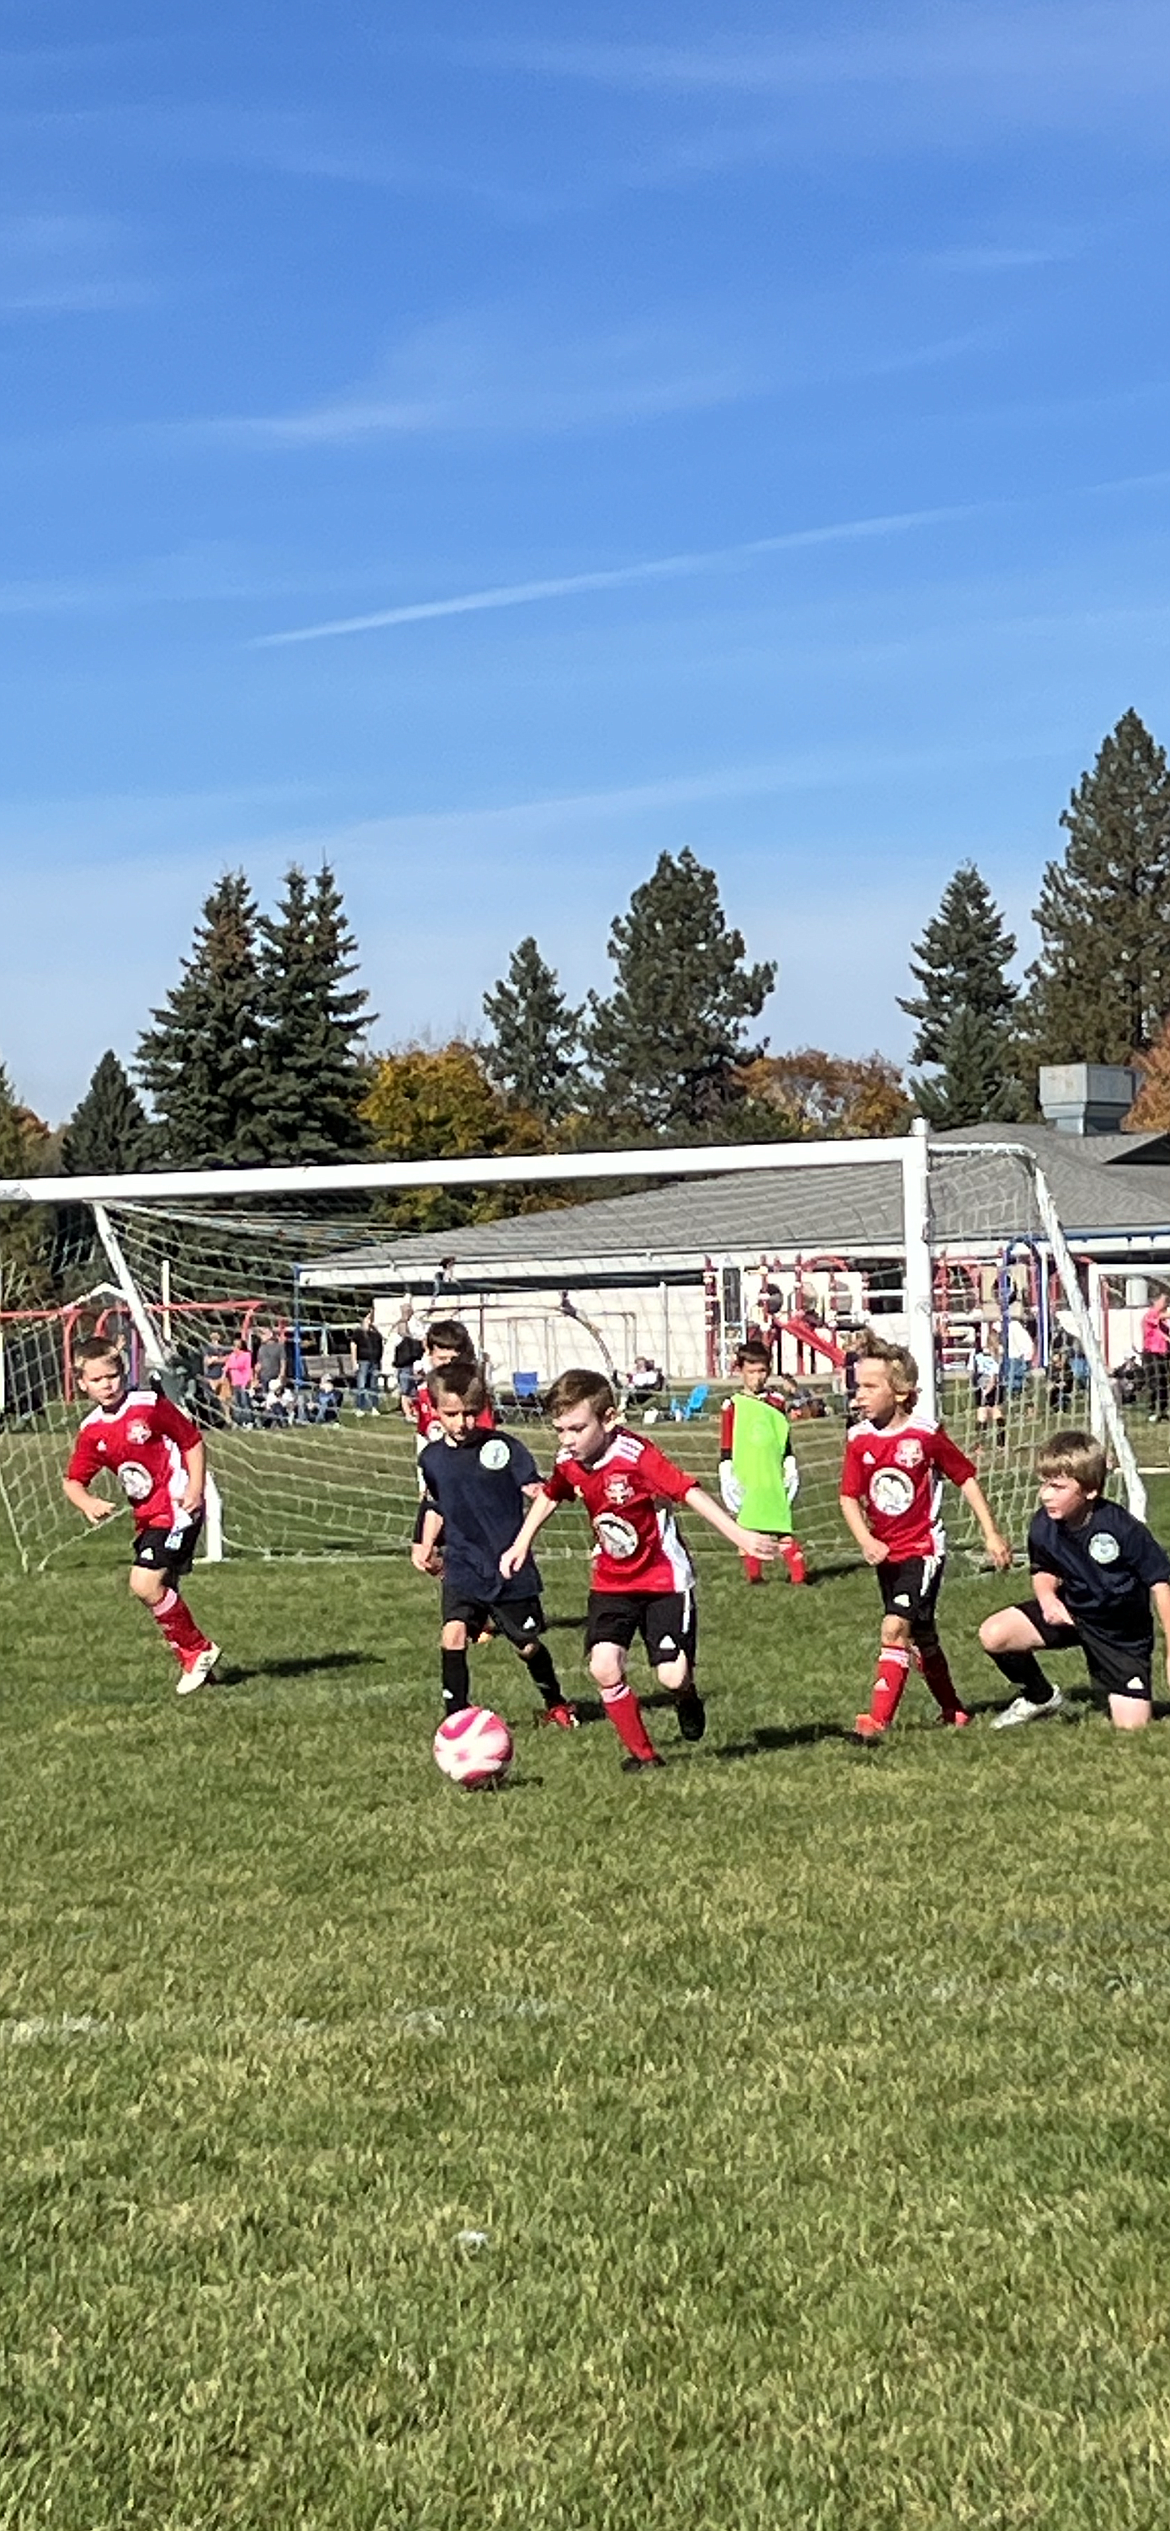 Photo by KATHY STERLING
On Oct. 21, the Timbers North FC 2016 Boys red soccer team beat the Spokane Sounders B2016 North South Krestian 5-3 in U8 fall league play at Hayden Meadows Elementary. Red goals were scored by Colin Happeny (2), Isaak Sterling (1), Elijah Cline (1) and Jackson Martin (1). Pictured in the red jerseys from left are Isaak Sterling, Jackson Martin, Colin Happeny, Elijah Cline and goalie Emmett Cowan.